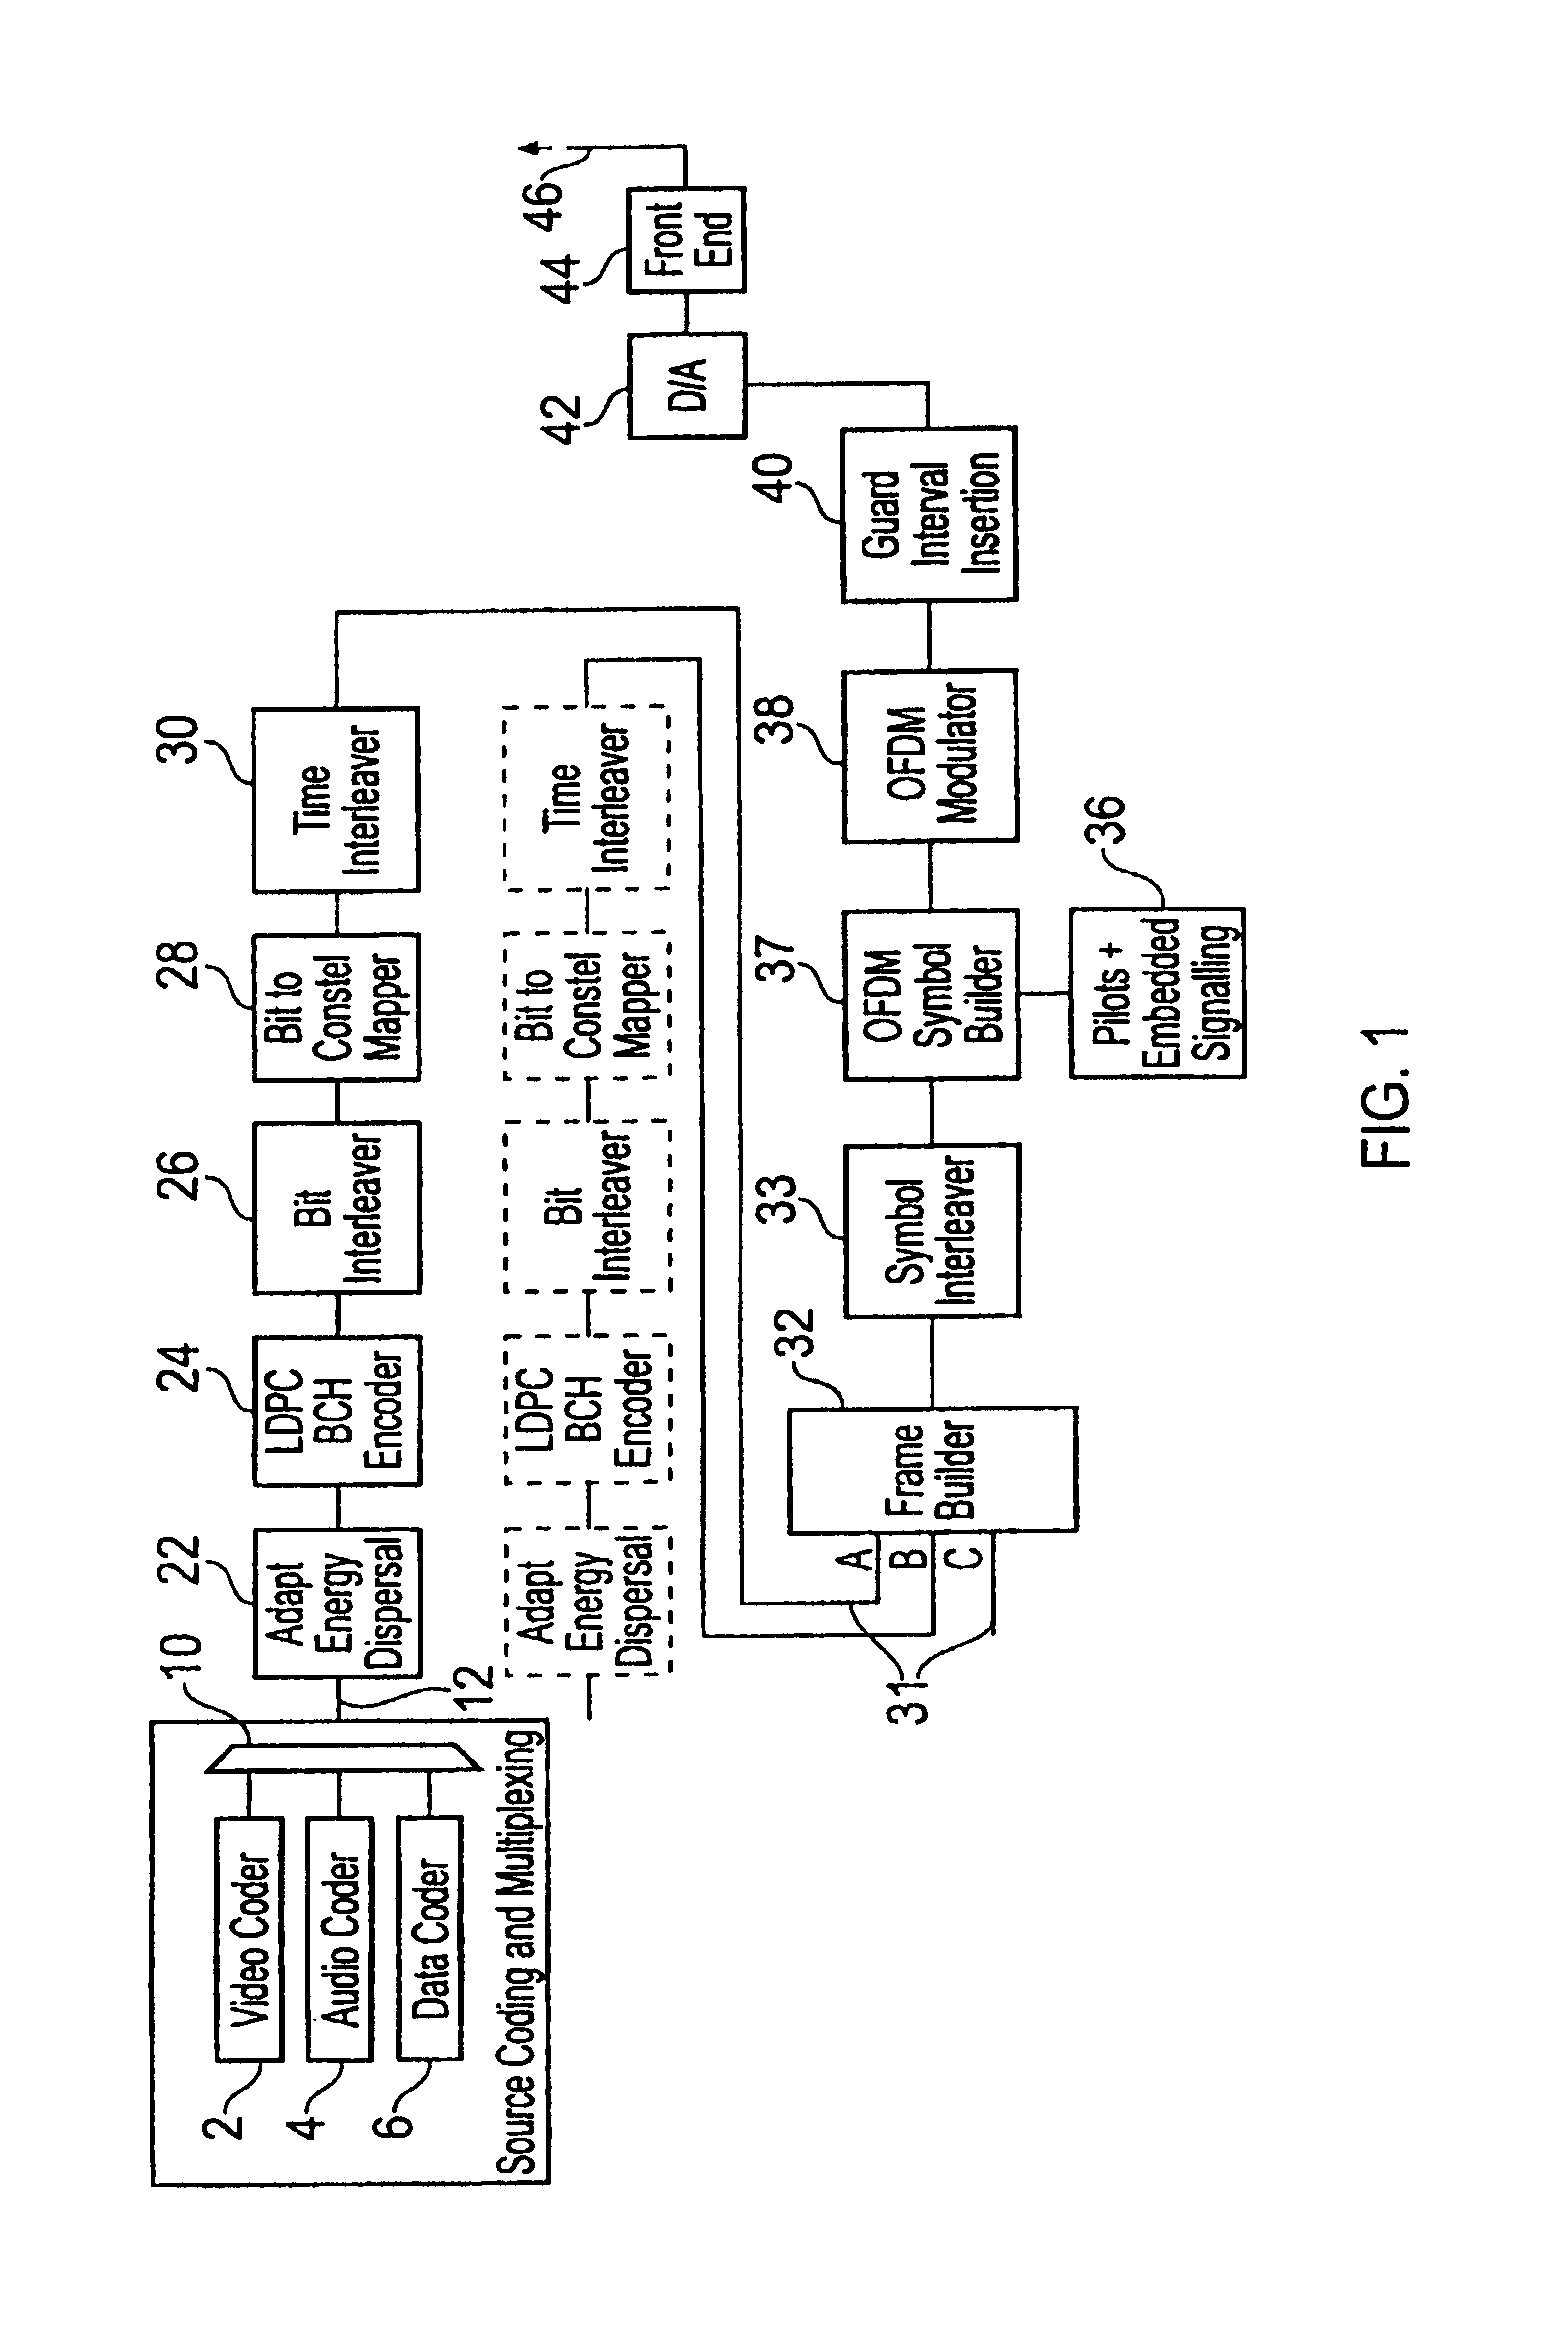 2k mode interleaver with odd interleaving only and per OFDM symbol permutaion code change in a digital video broadcasting (DVB) standard